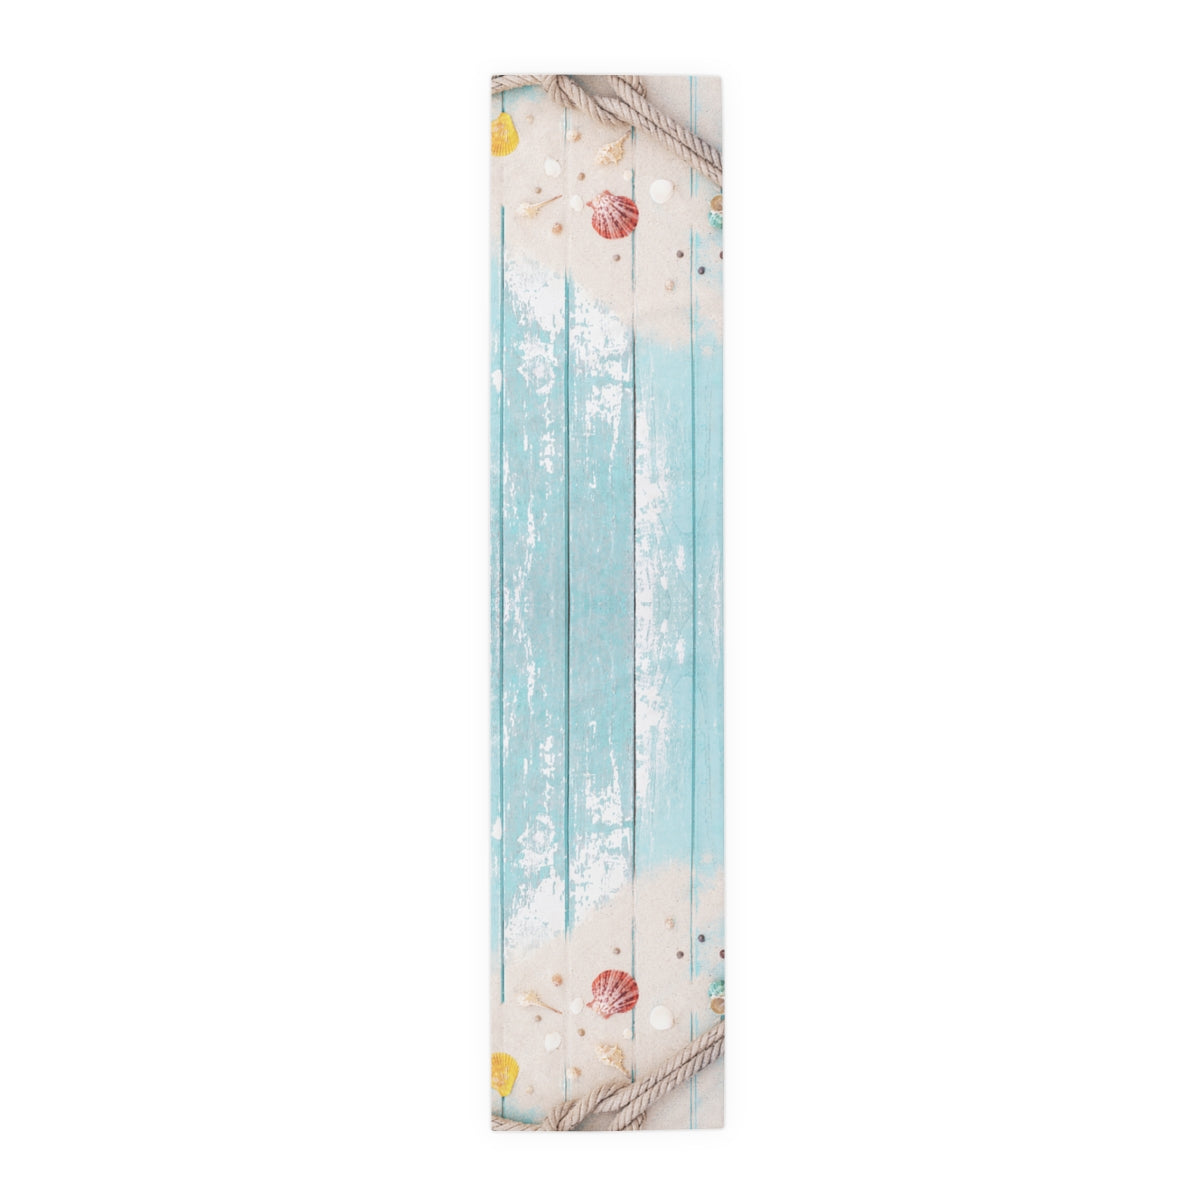 Table Runner Boardwalk Seashells available in 2 sizes, Cotton OR Polyester